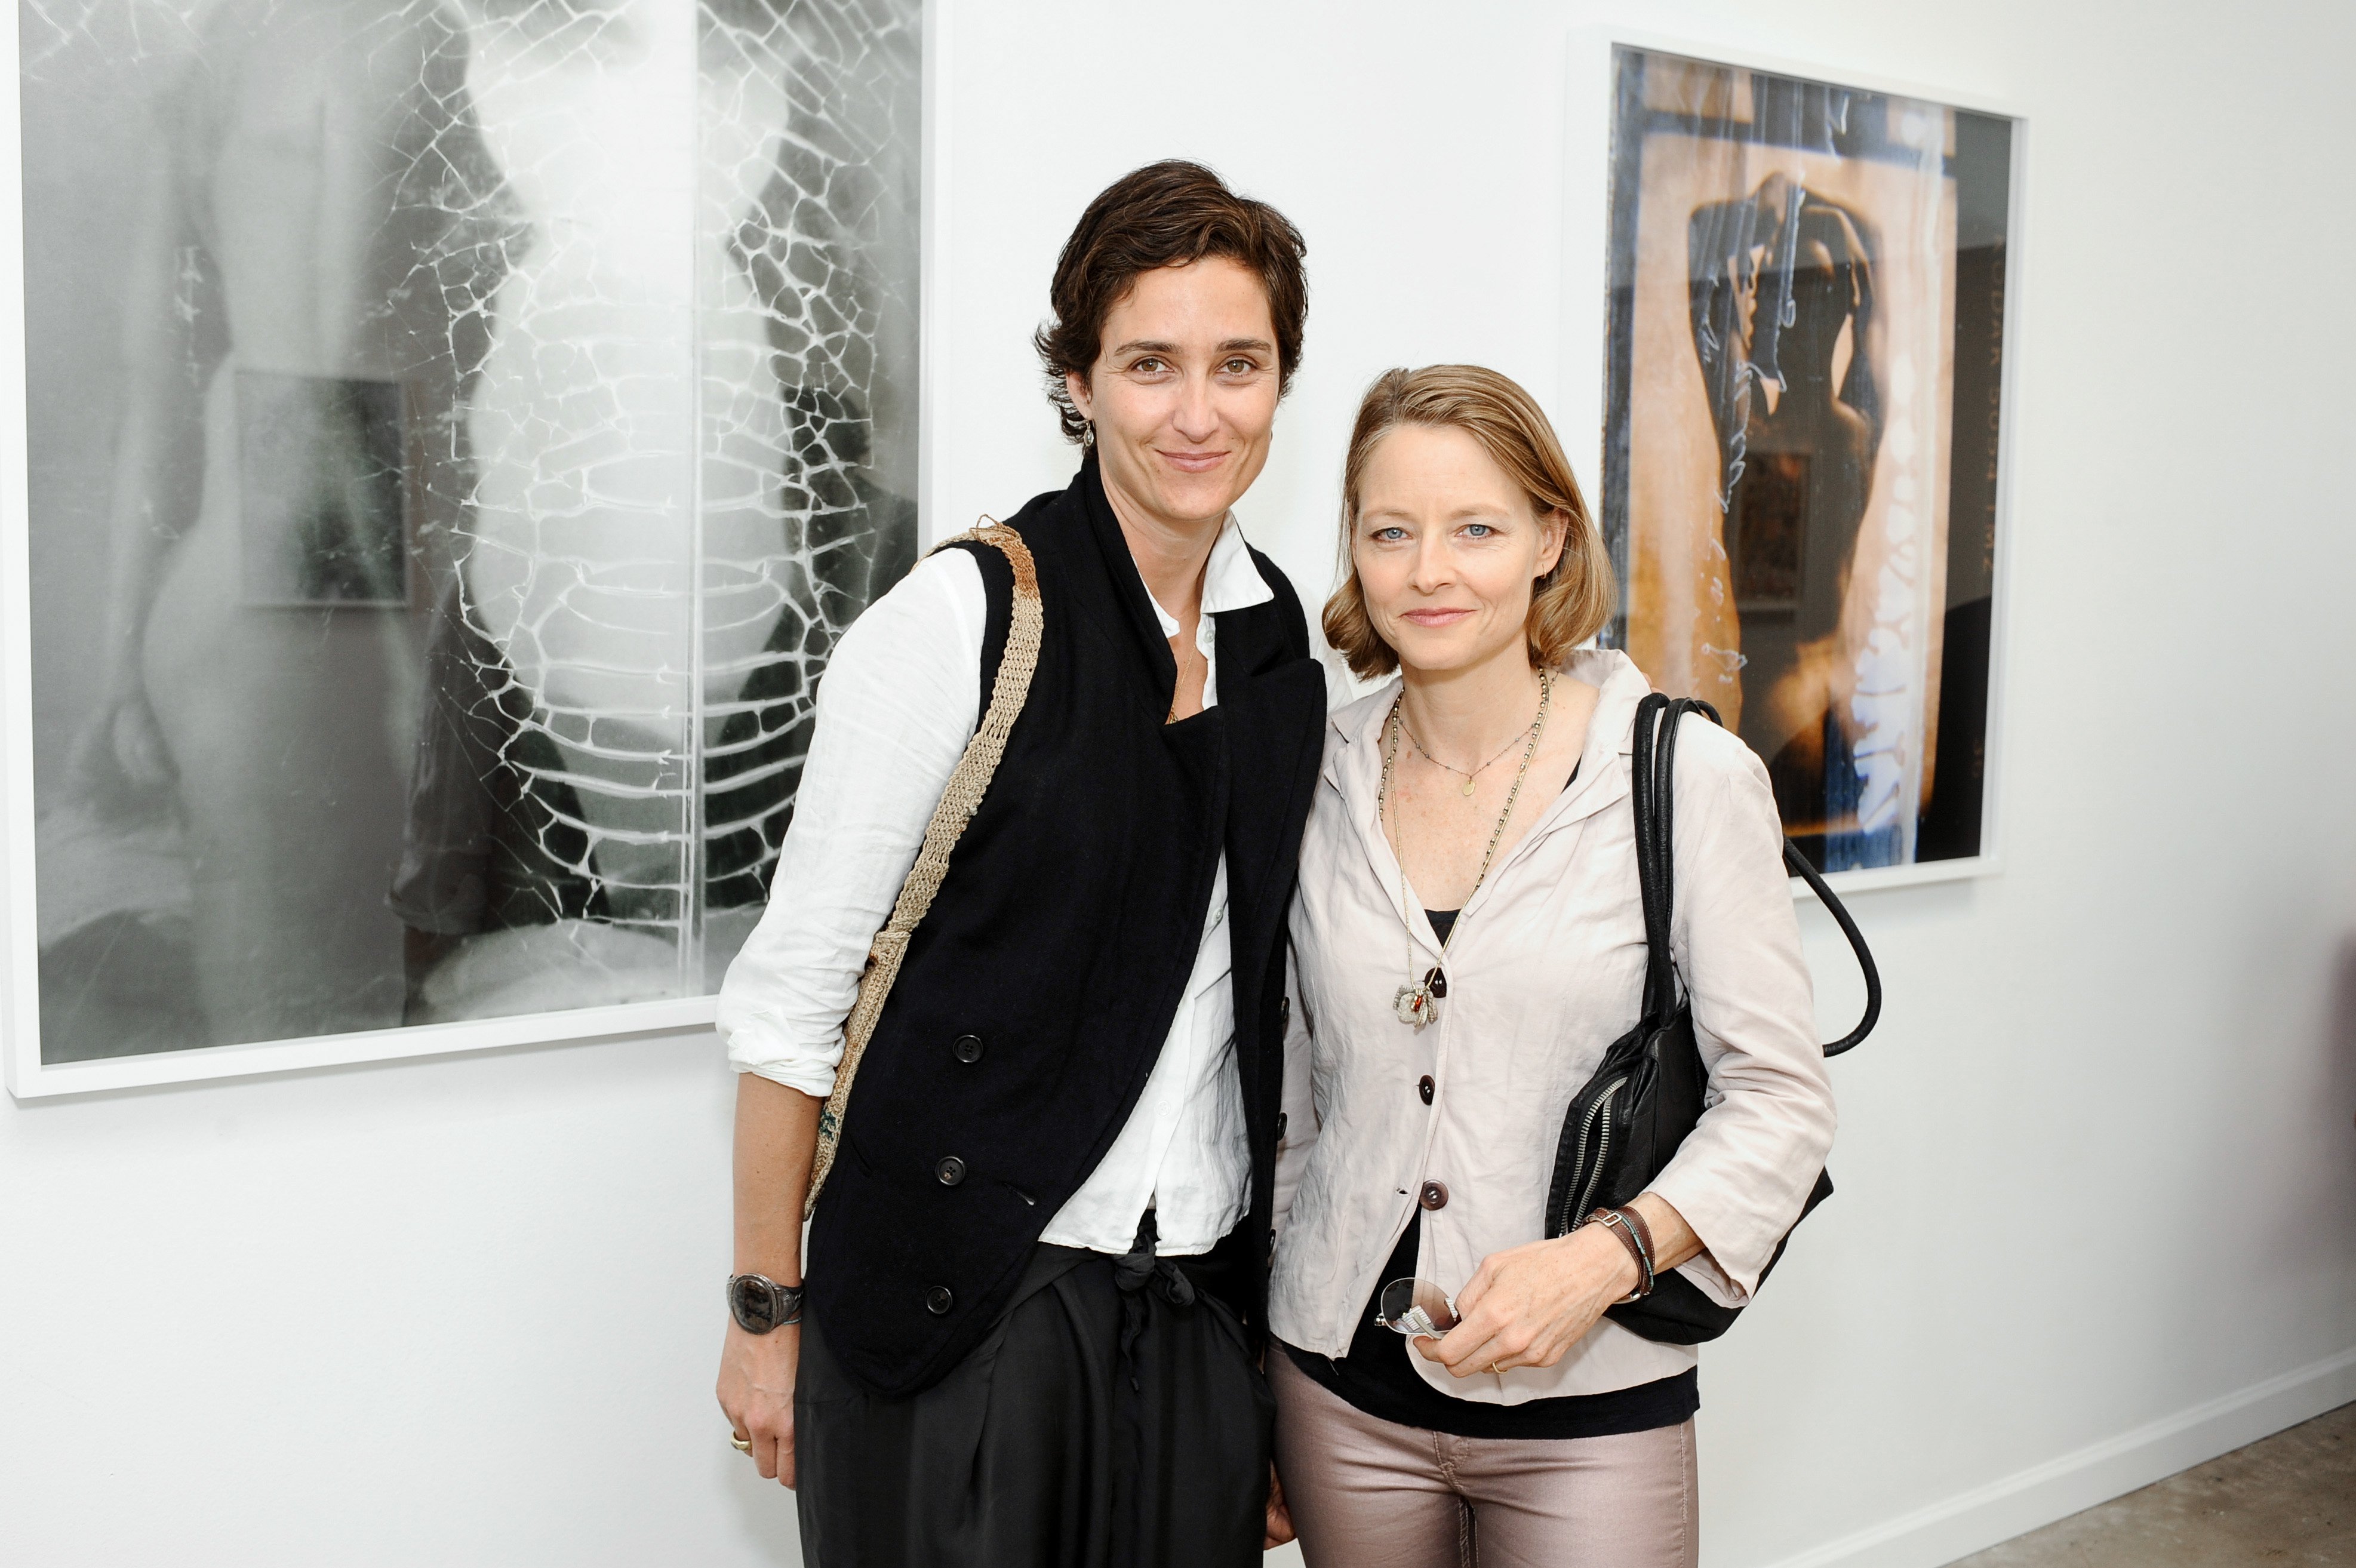 Alexandra Hedison and Jodie Foster attend Firooz Zahedi Opening At Kopeikin Gallery on April 27, 2014, in Los Angeles, California. | Source: Getty Images.